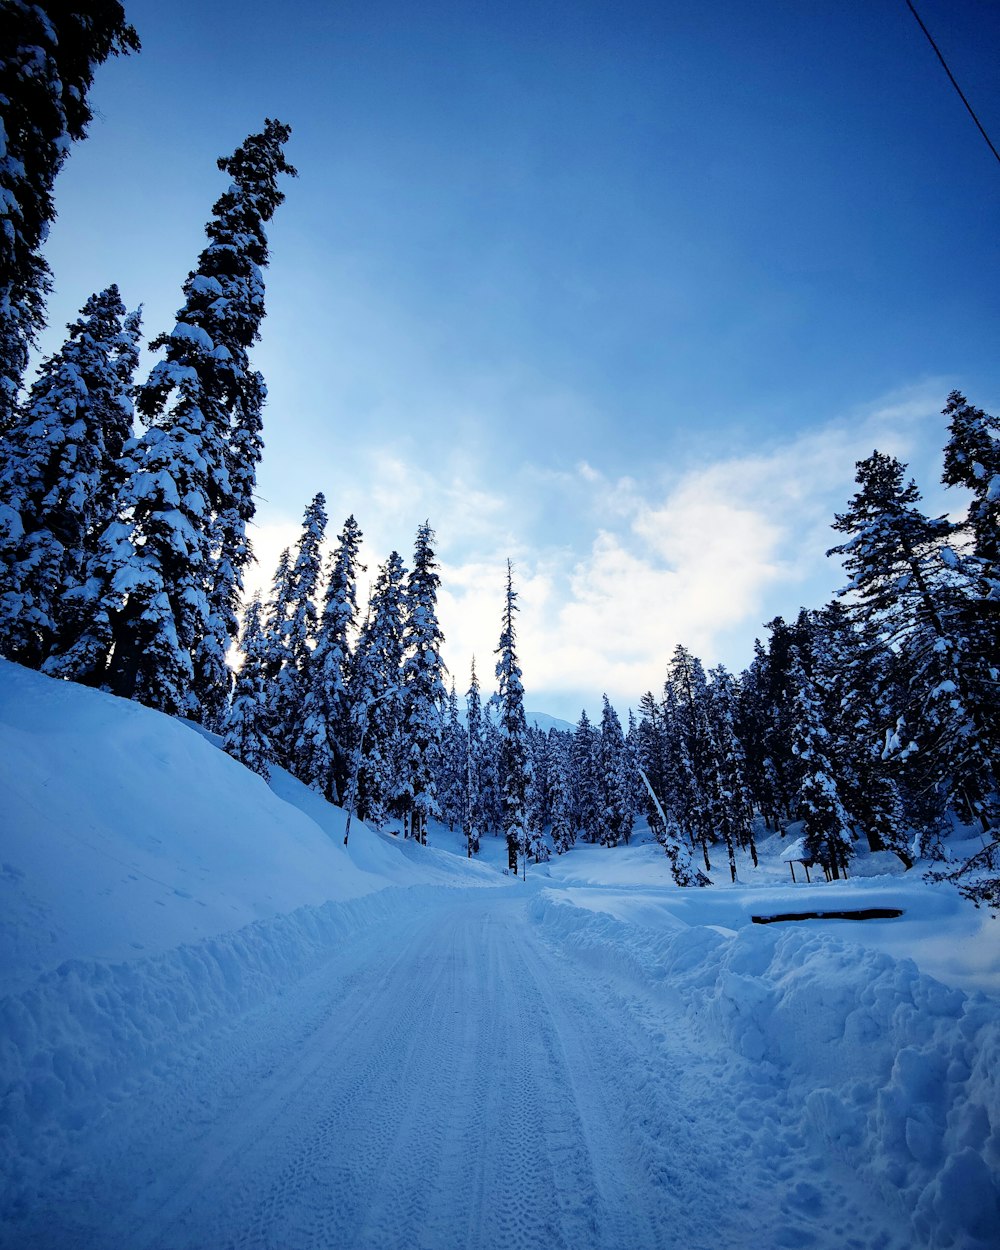 a snow covered road surrounded by trees under a blue sky